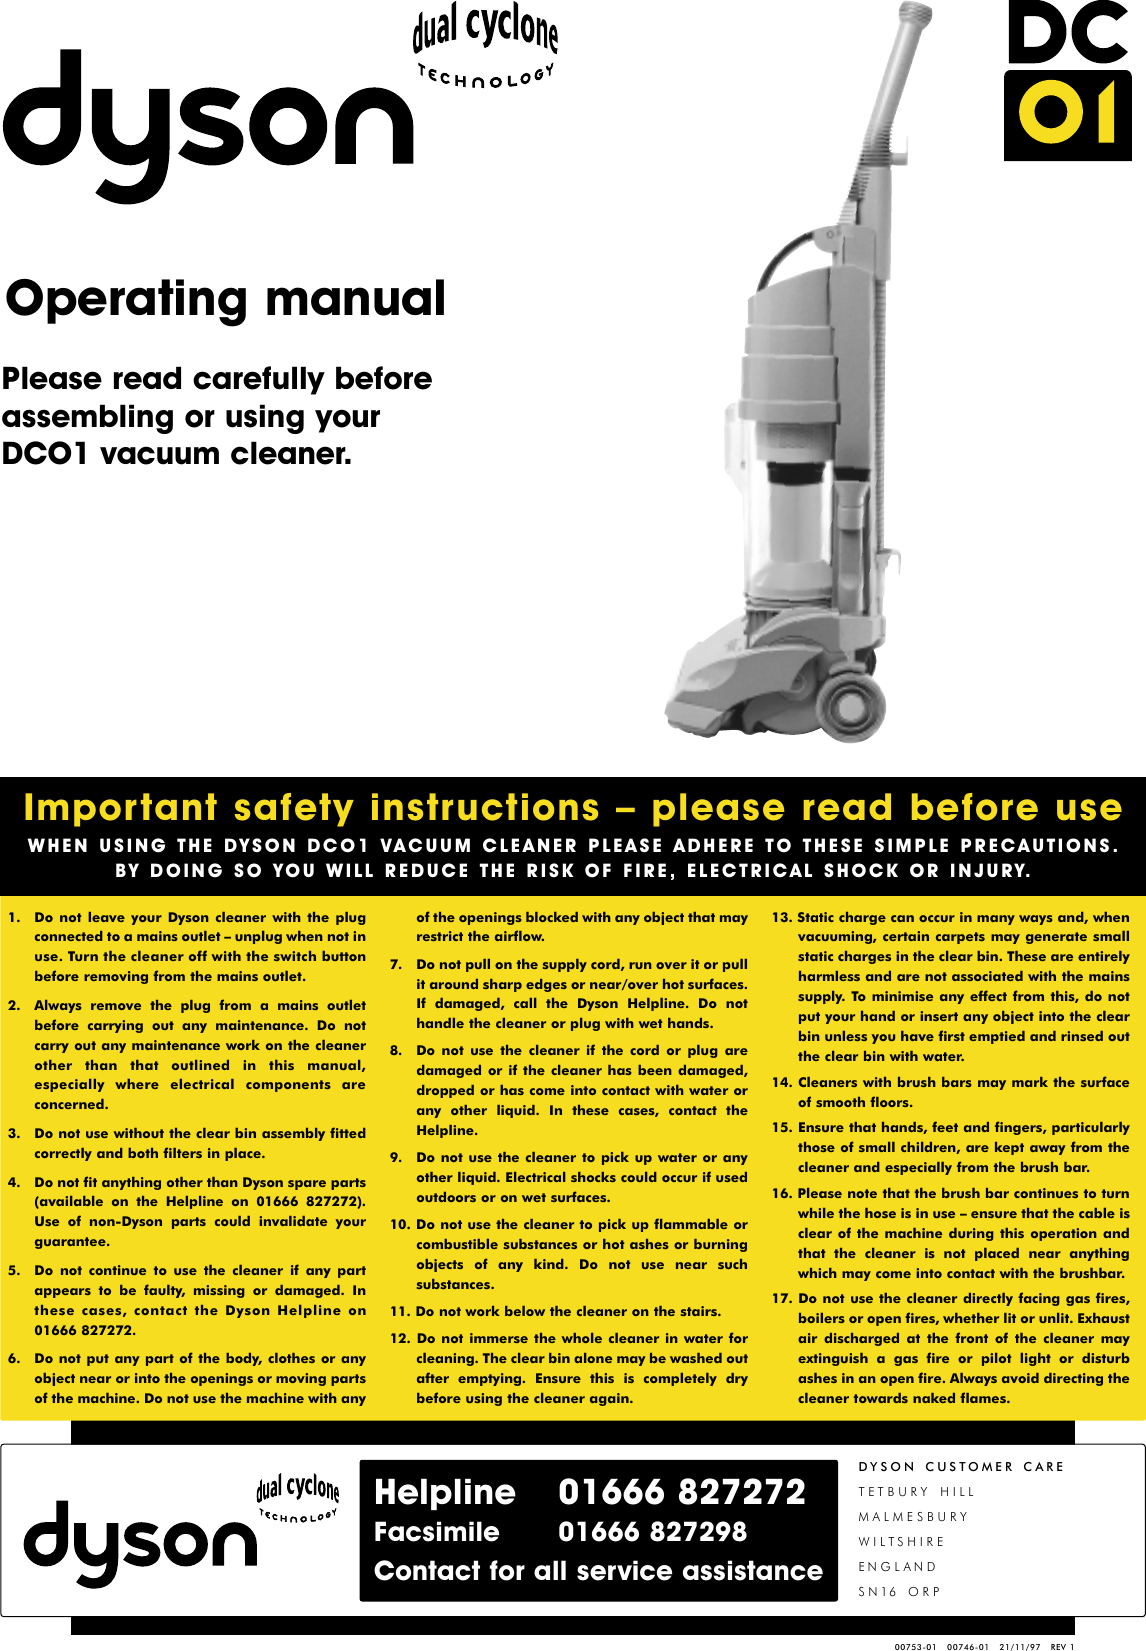 Page 1 of 6 - Dyson Dyson-Dc-01-Users-Manual- 00753-01 DC01 OPERATING MANUAL  Dyson-dc-01-users-manual